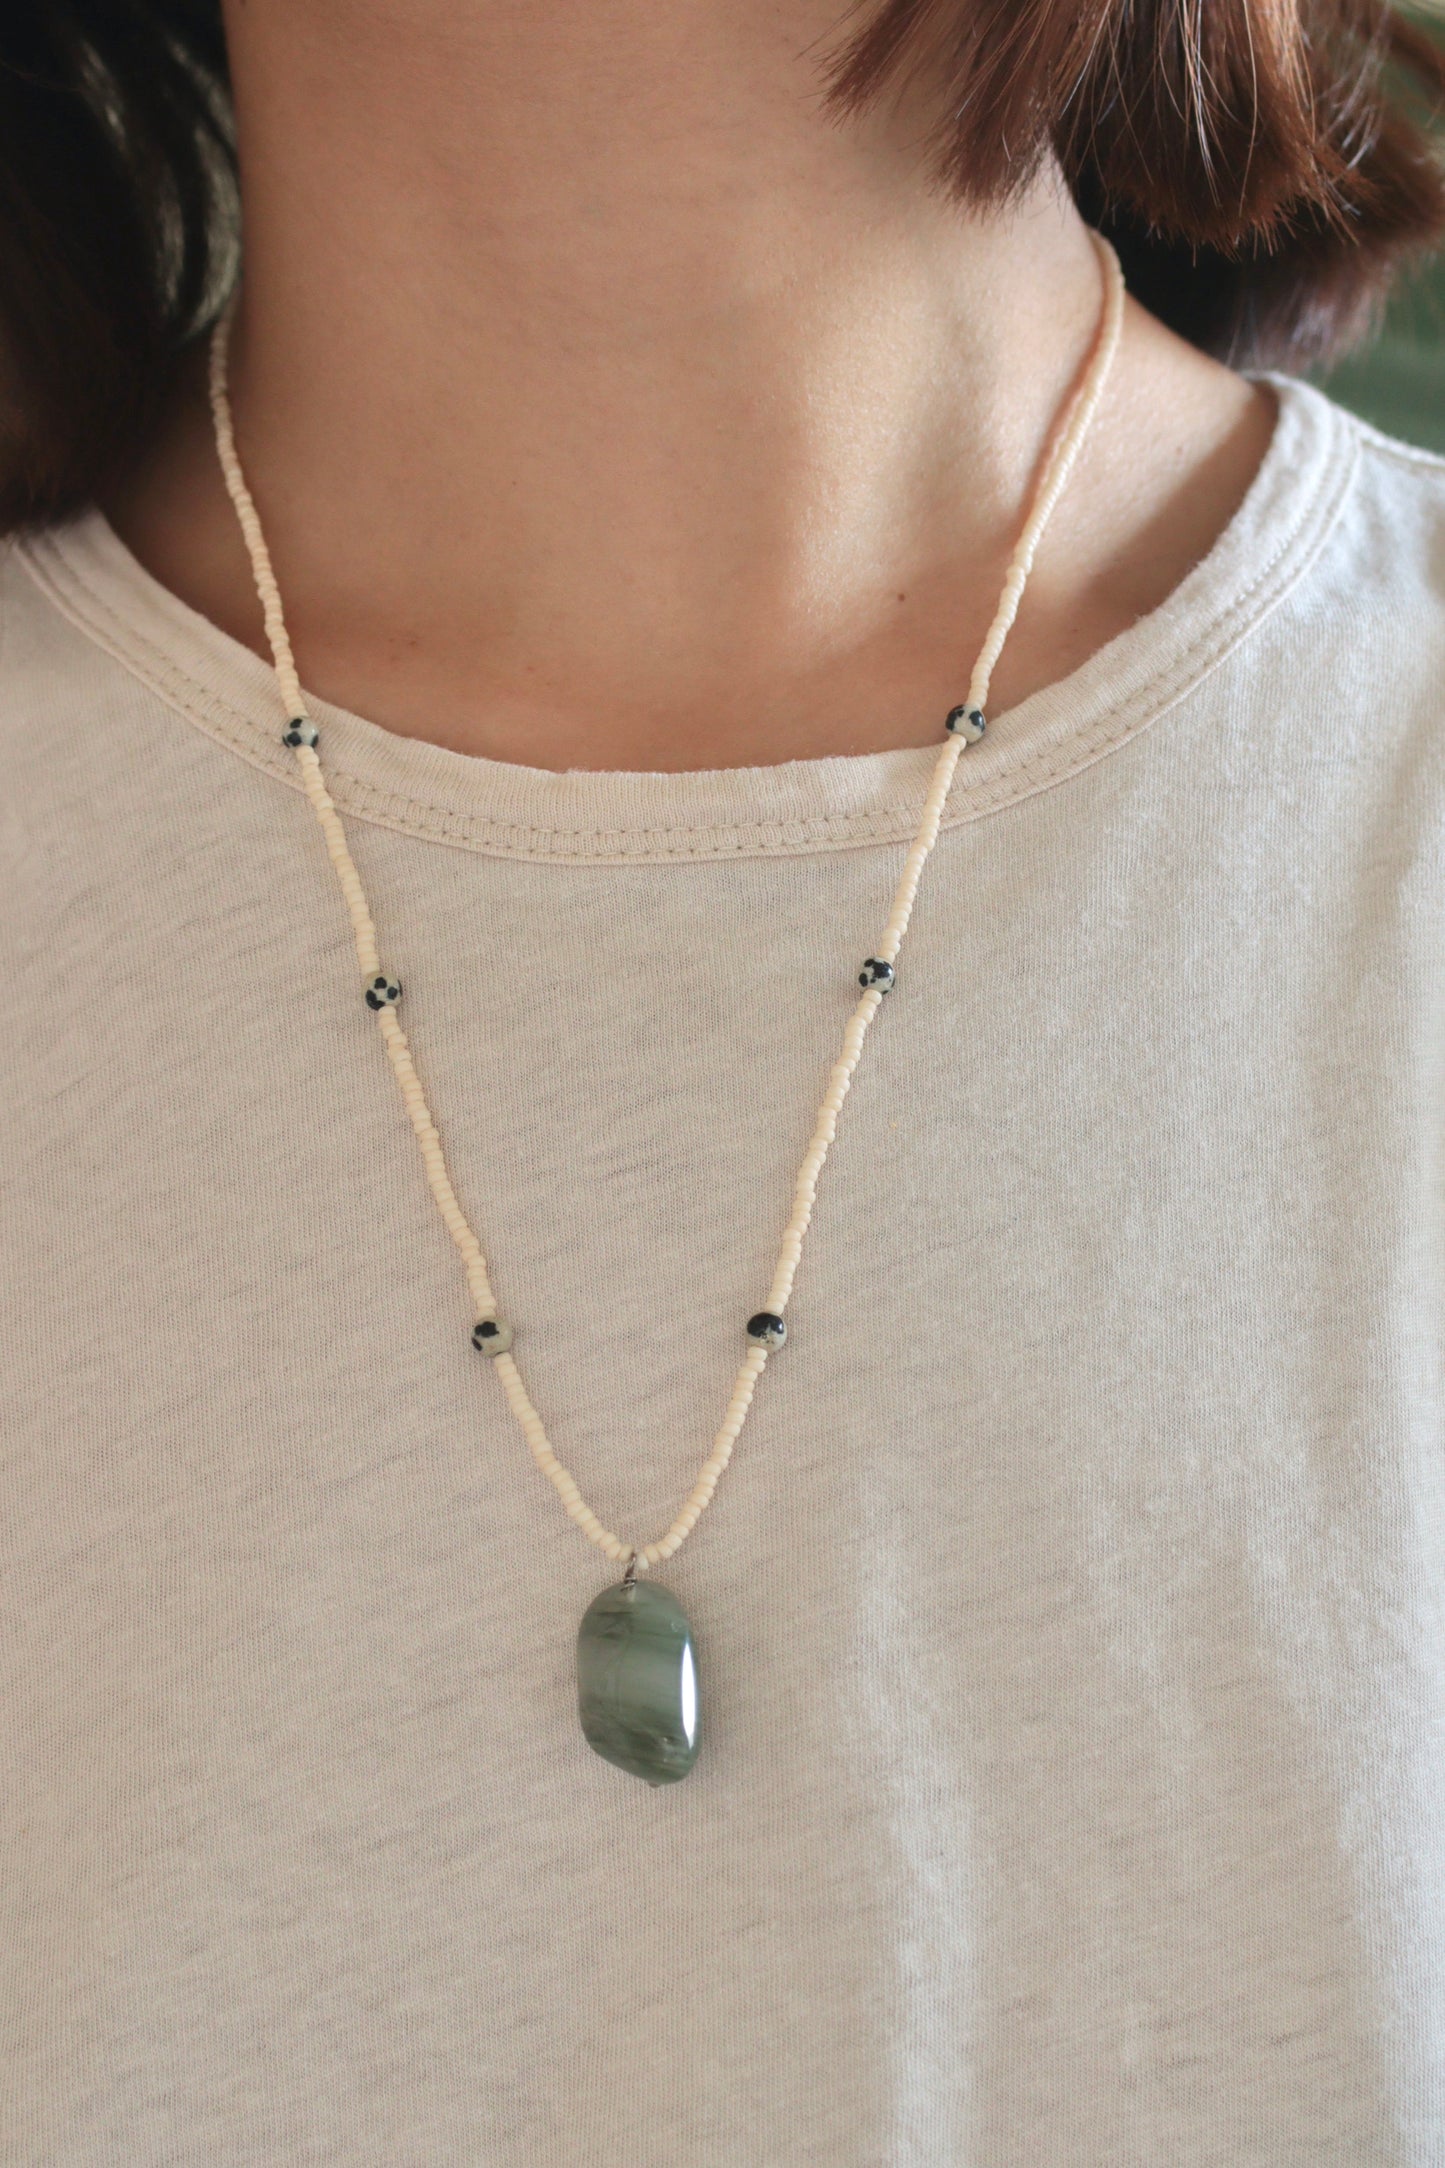 STONE NECKLACE - Green lace